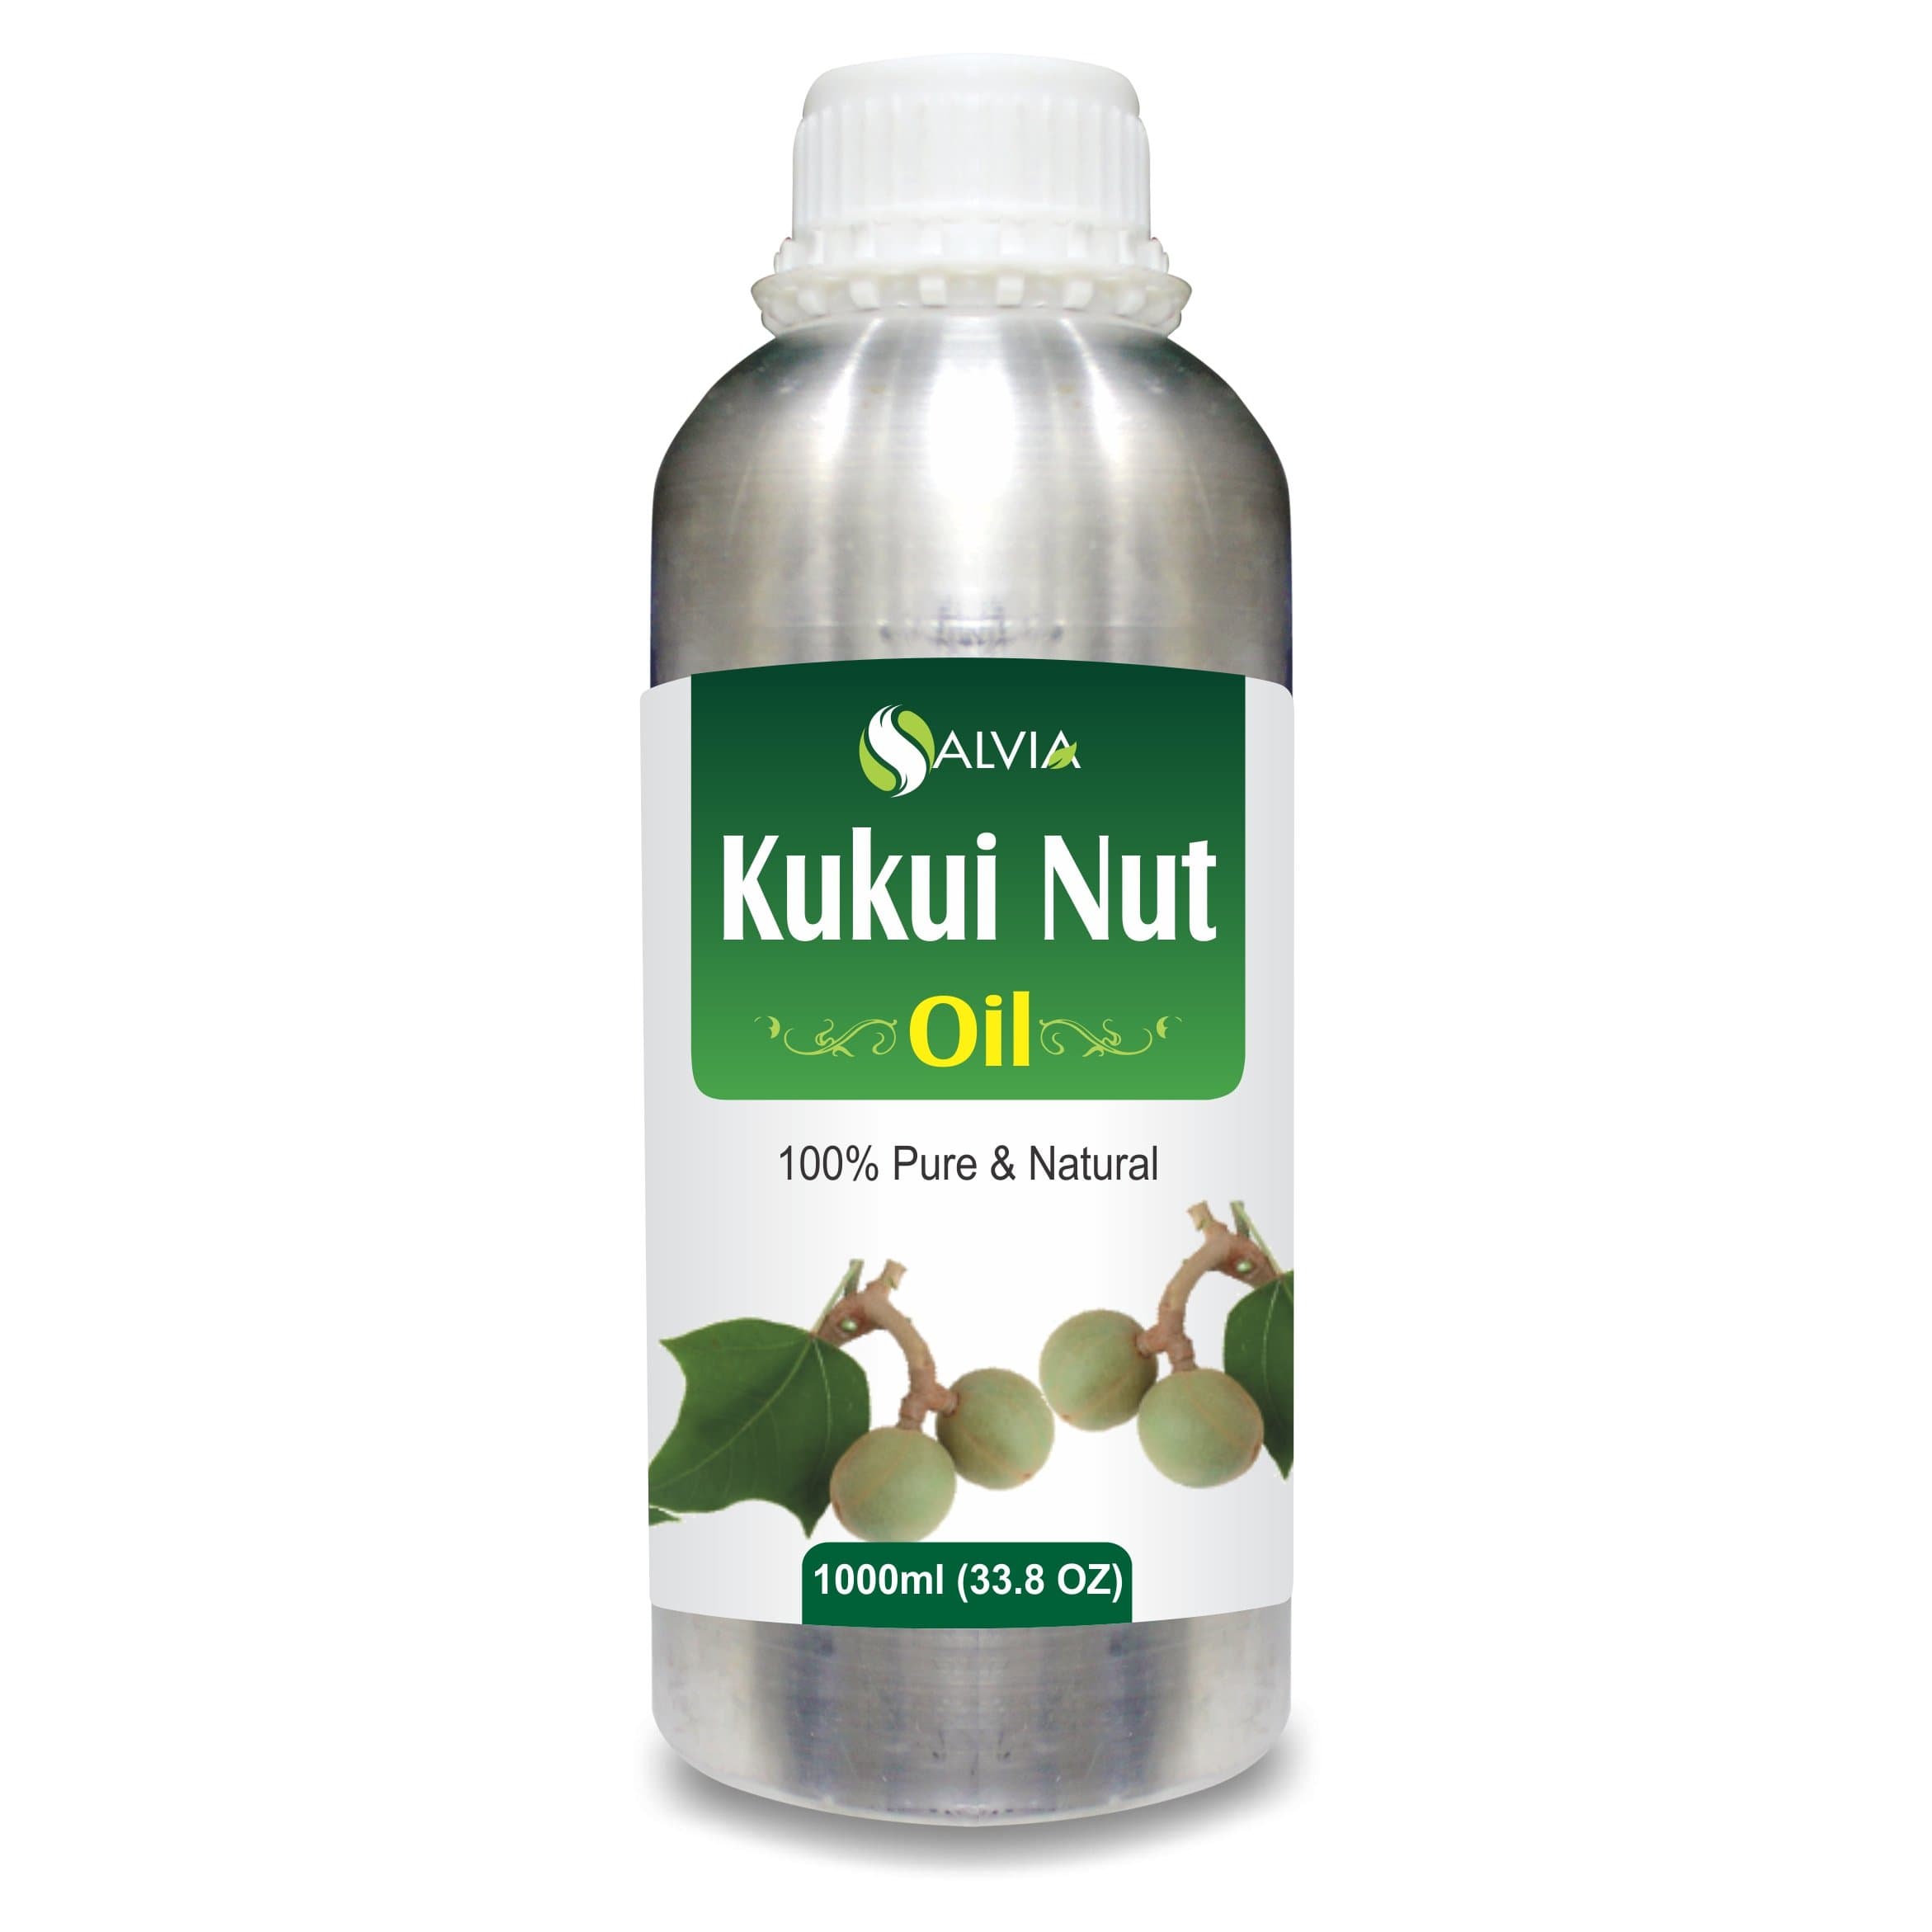 Salvia Natural Carrier Oils,Anti Ageing,Anti-ageing Oil 1000ml Kukui Nut (Aleurites Moluccans) Oil 100% Natural Pure Carrier Oil Moistures & Hydrates Skin, Anti-Aging Properties, Collagen Production & More